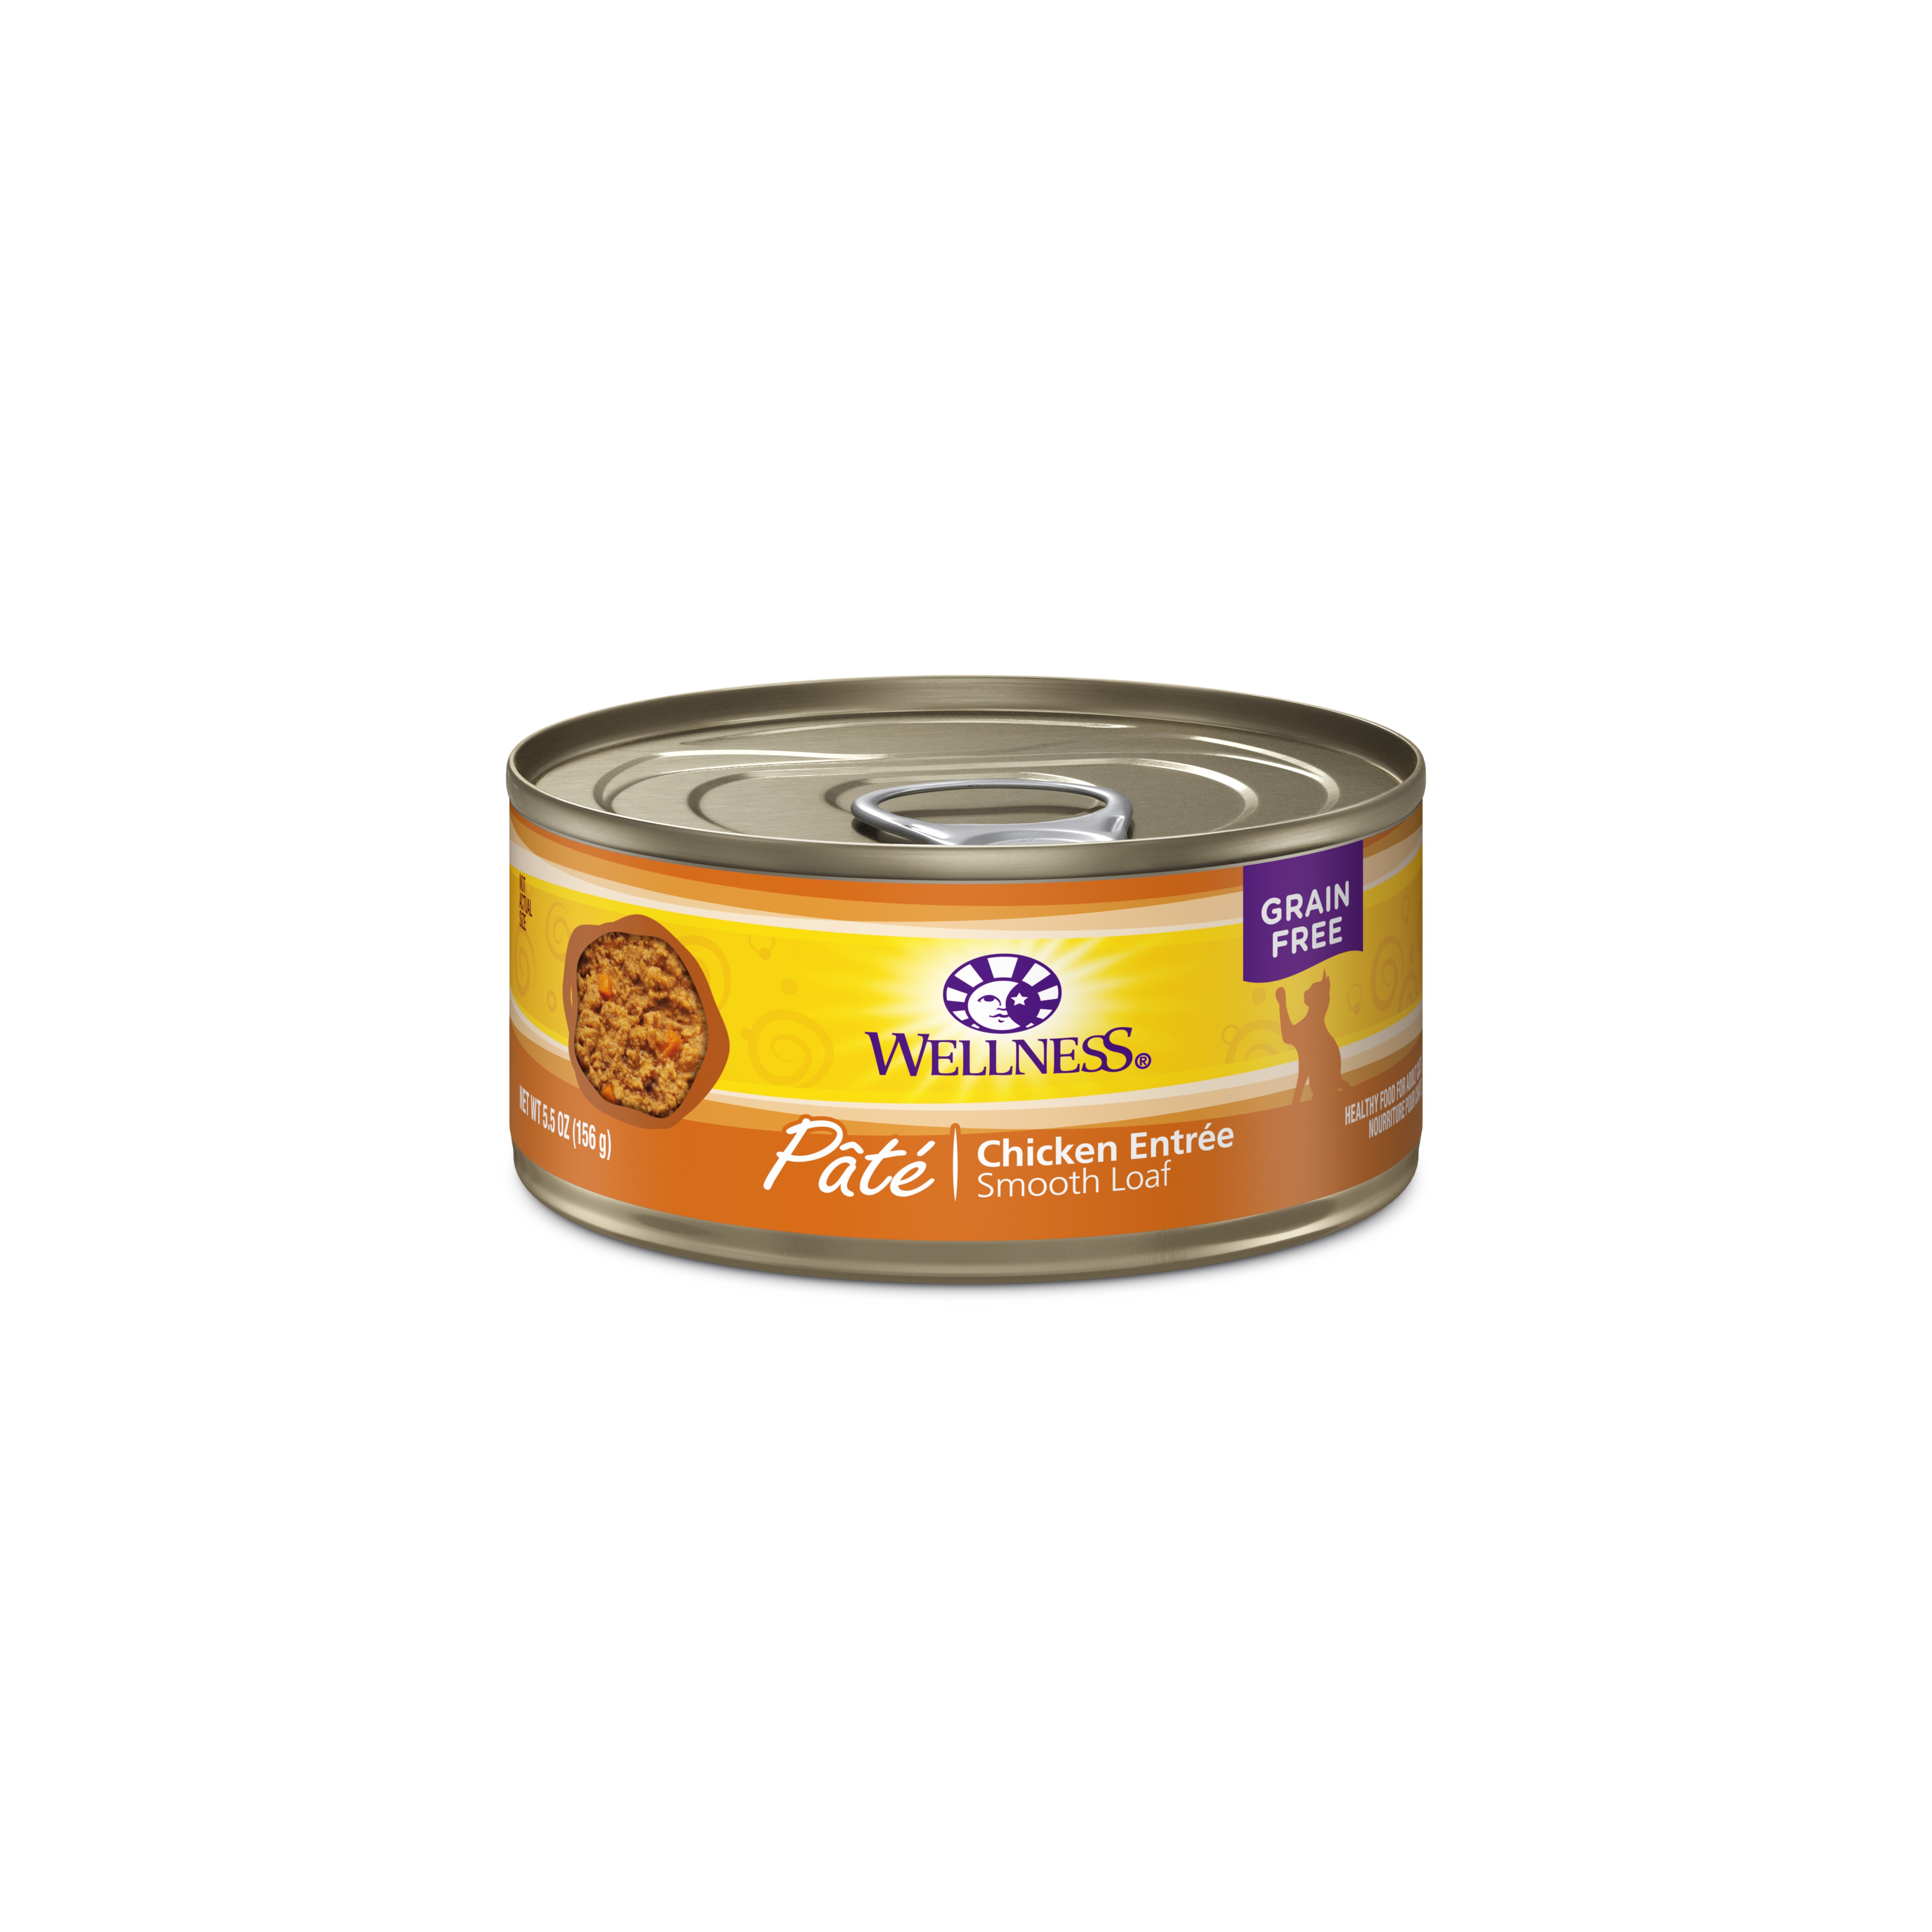 Wellness Complete Health Pate - Chicken Entree Canned Cat Food